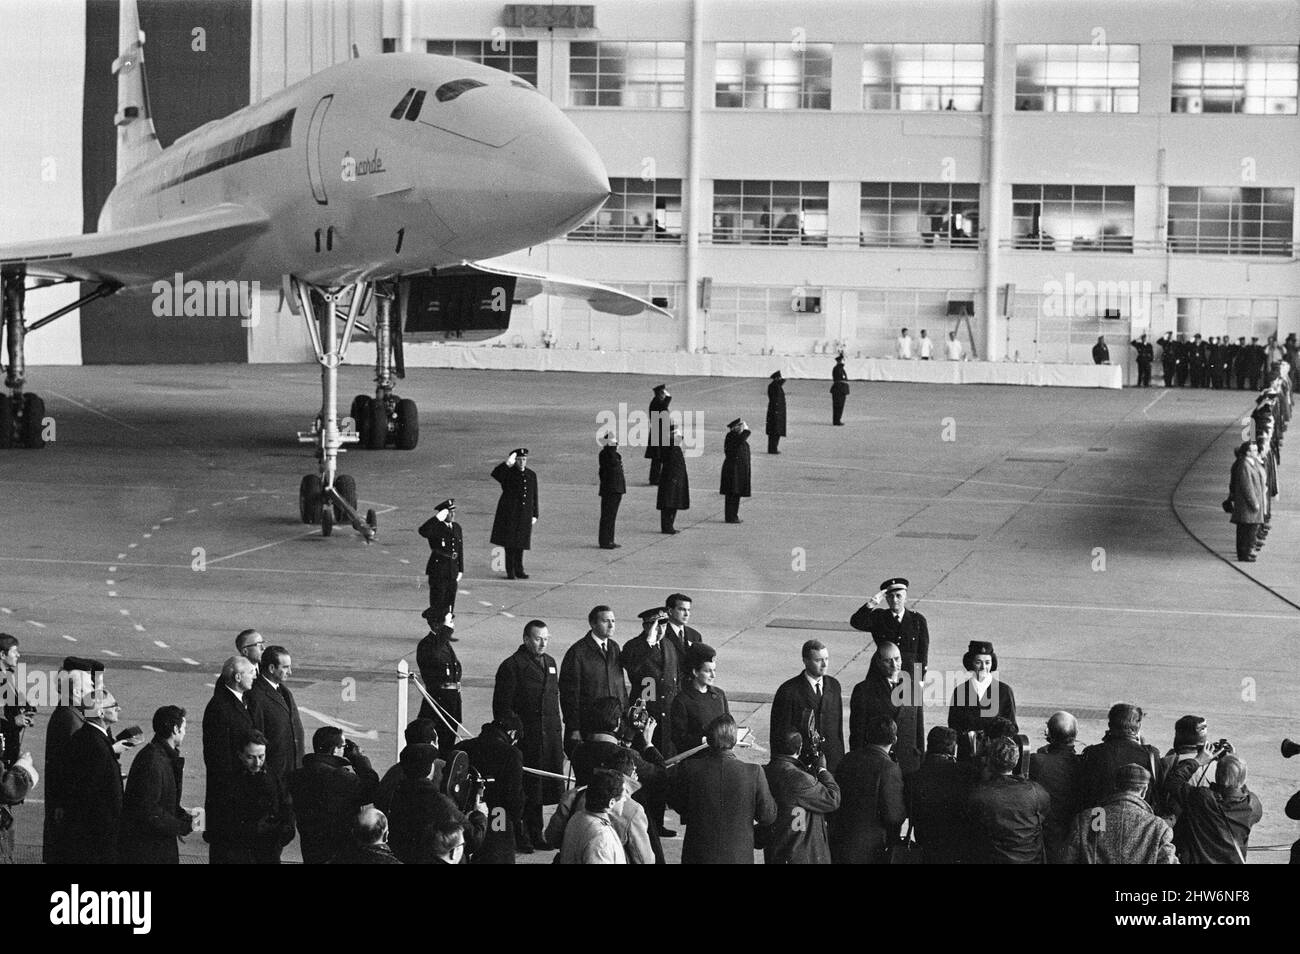 Concorde, prototype 001 makes its first official public appearance as it is unveiled from its Sud Aviation's hanger in Toulouse, France, Monday 11th December 1967. Our Picture Shows ... dignitaries Tony Benn, Britain's Minister of Technology, and Jean Chamant, French Minister of Transport at Concorde's official roll out ceremony at Toulouse. Stock Photo